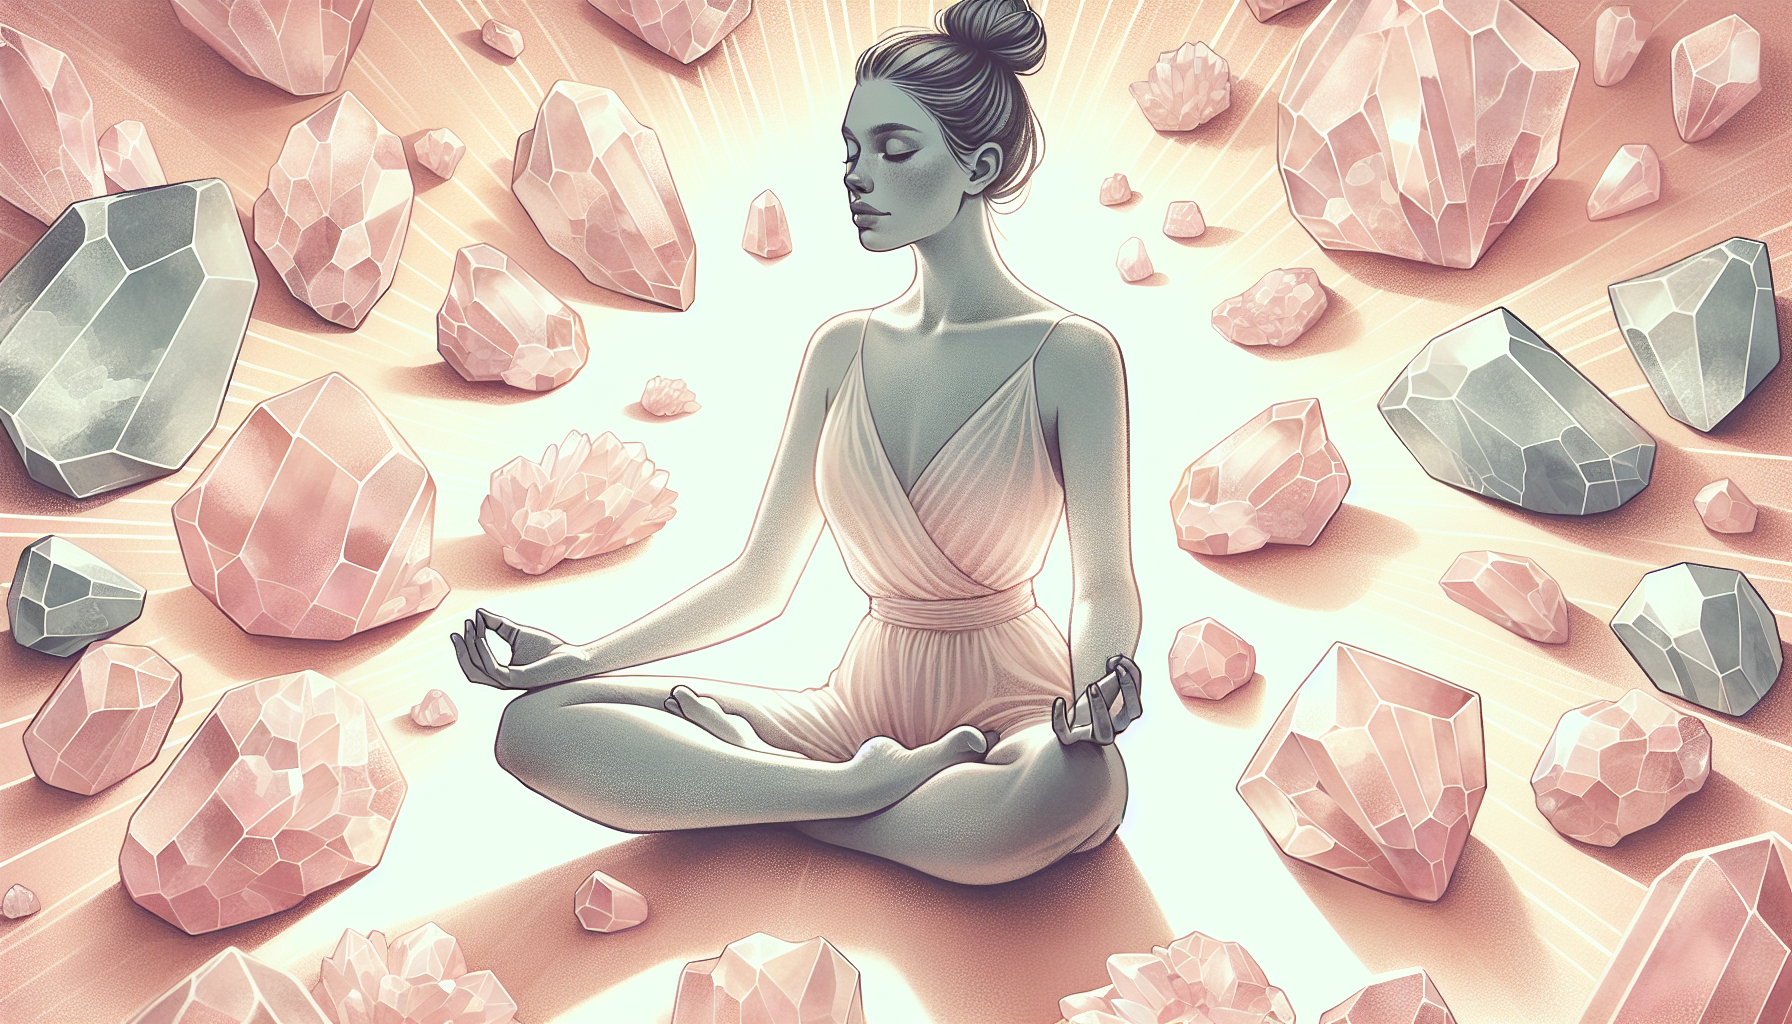 Illustration of a person meditating with rose quartz crystals placed around them